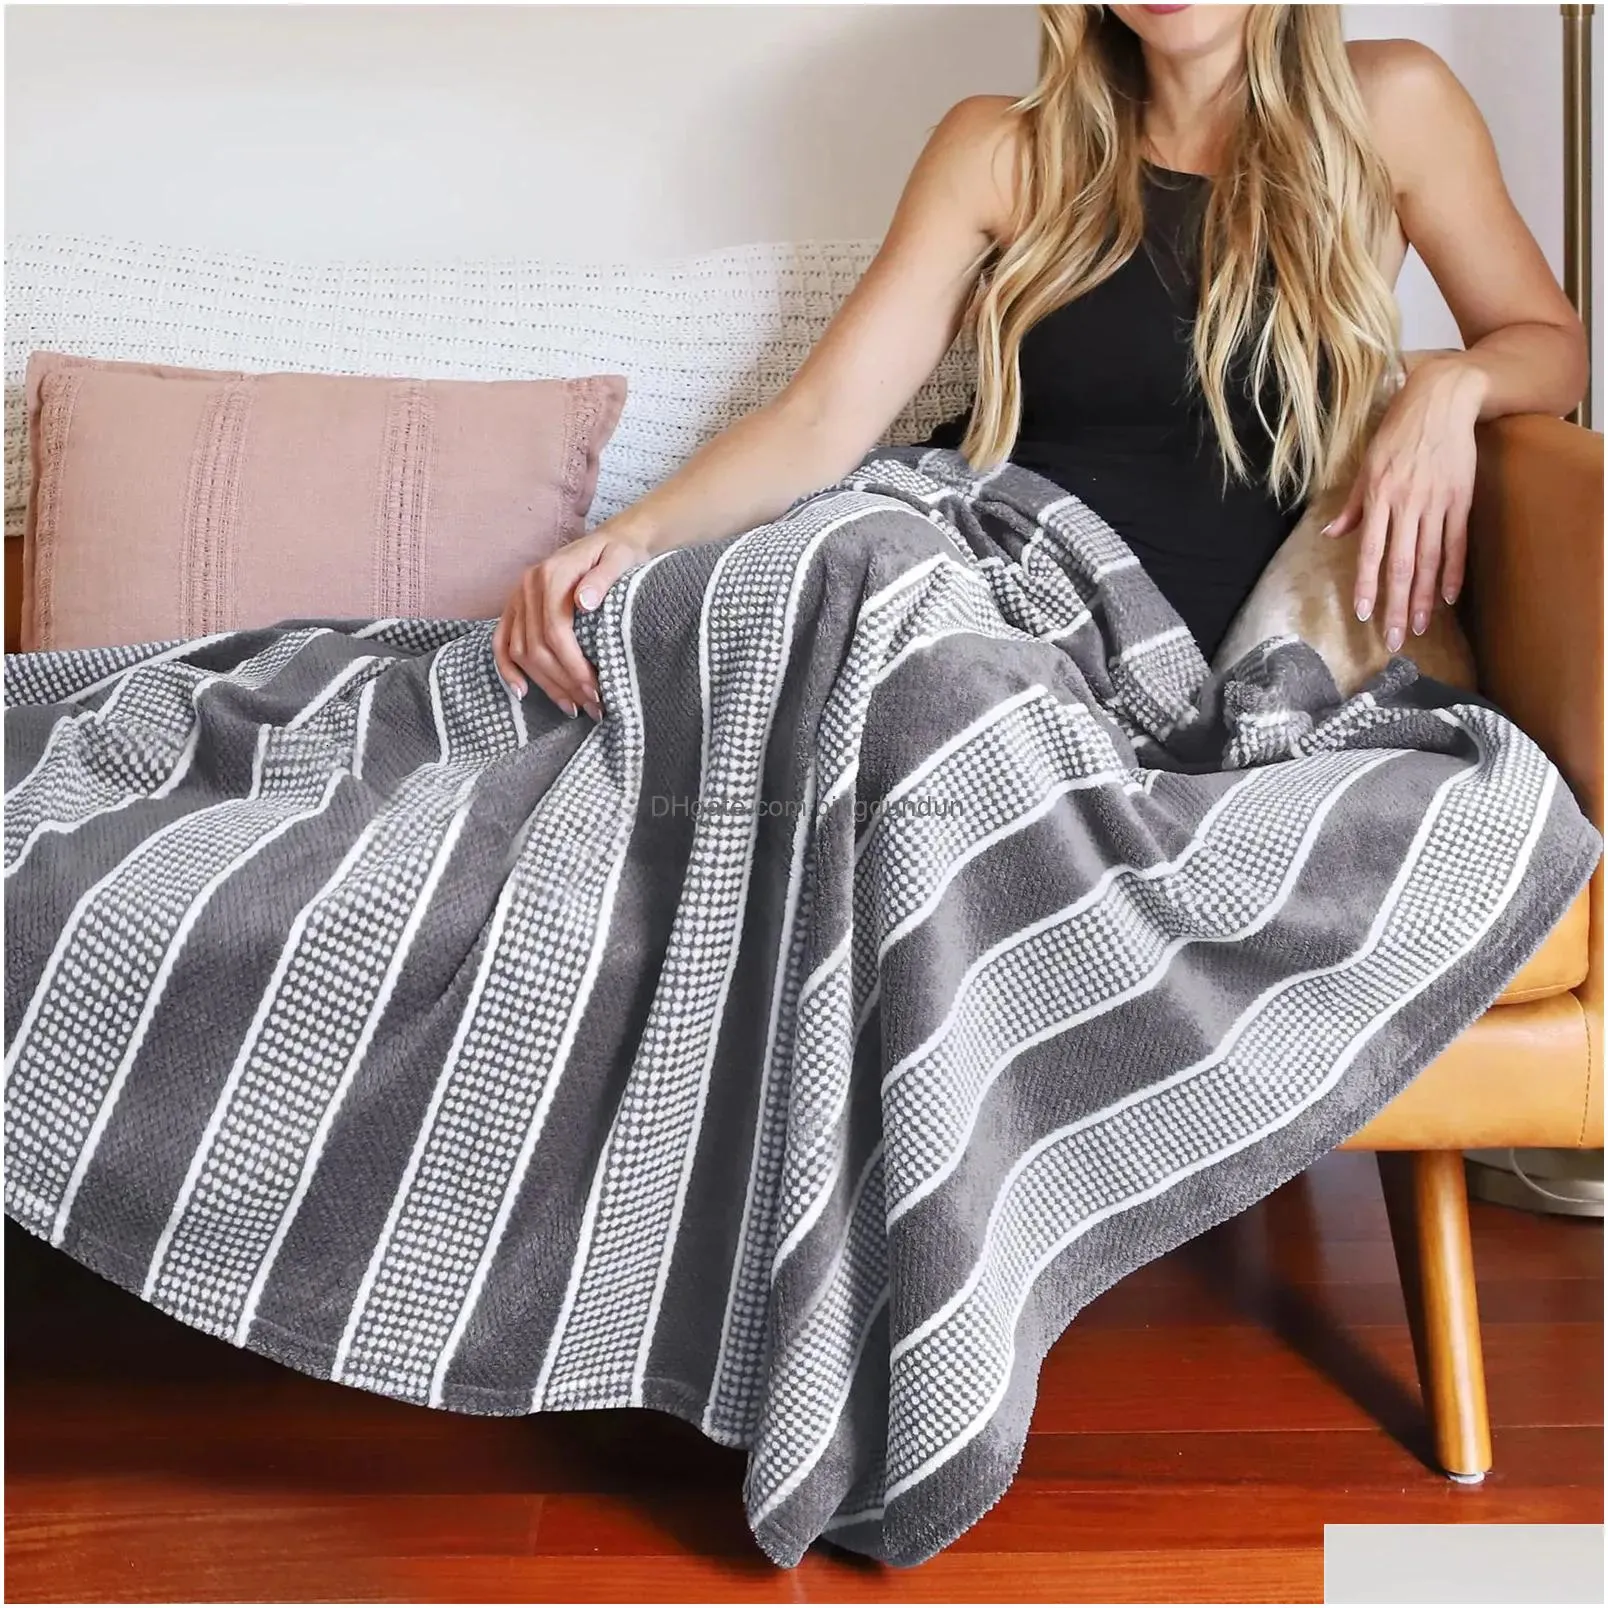 Blankets CLOOCL Fashion Striped Throw Dots Splicing Flannel Blanket Comfy for Bedding Sofa Car Camping All Seasons 231113